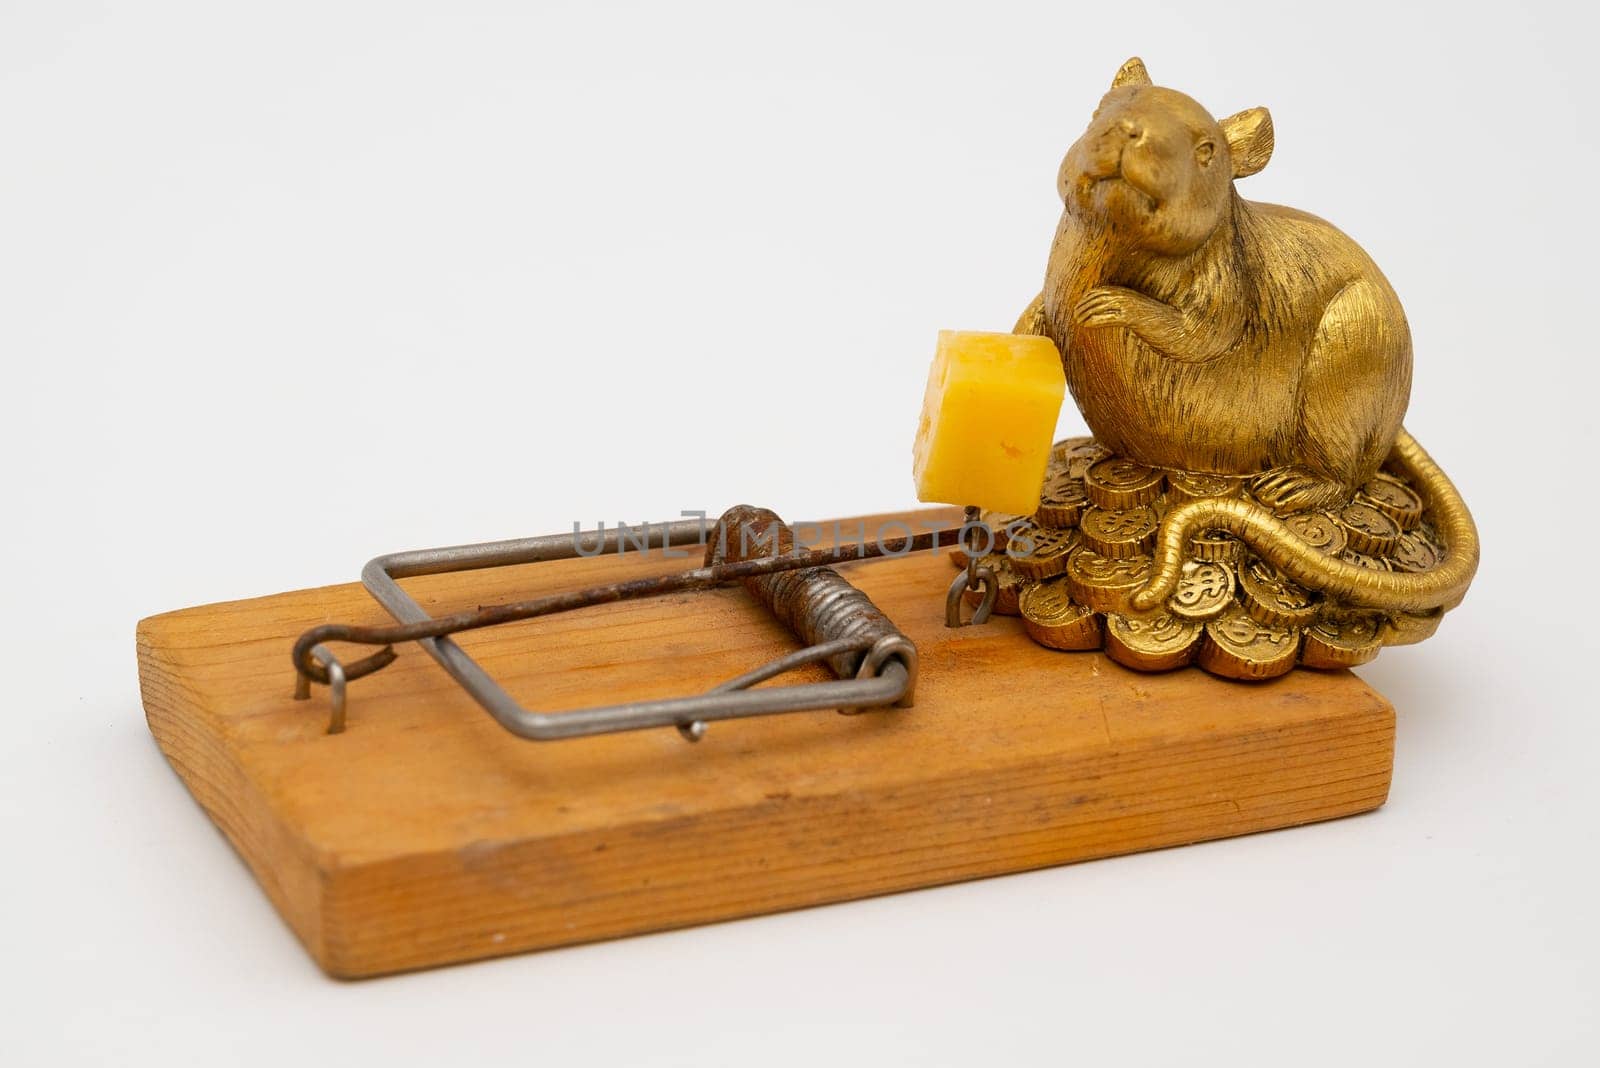 figurine of a rat near cheese in an old mousetrap